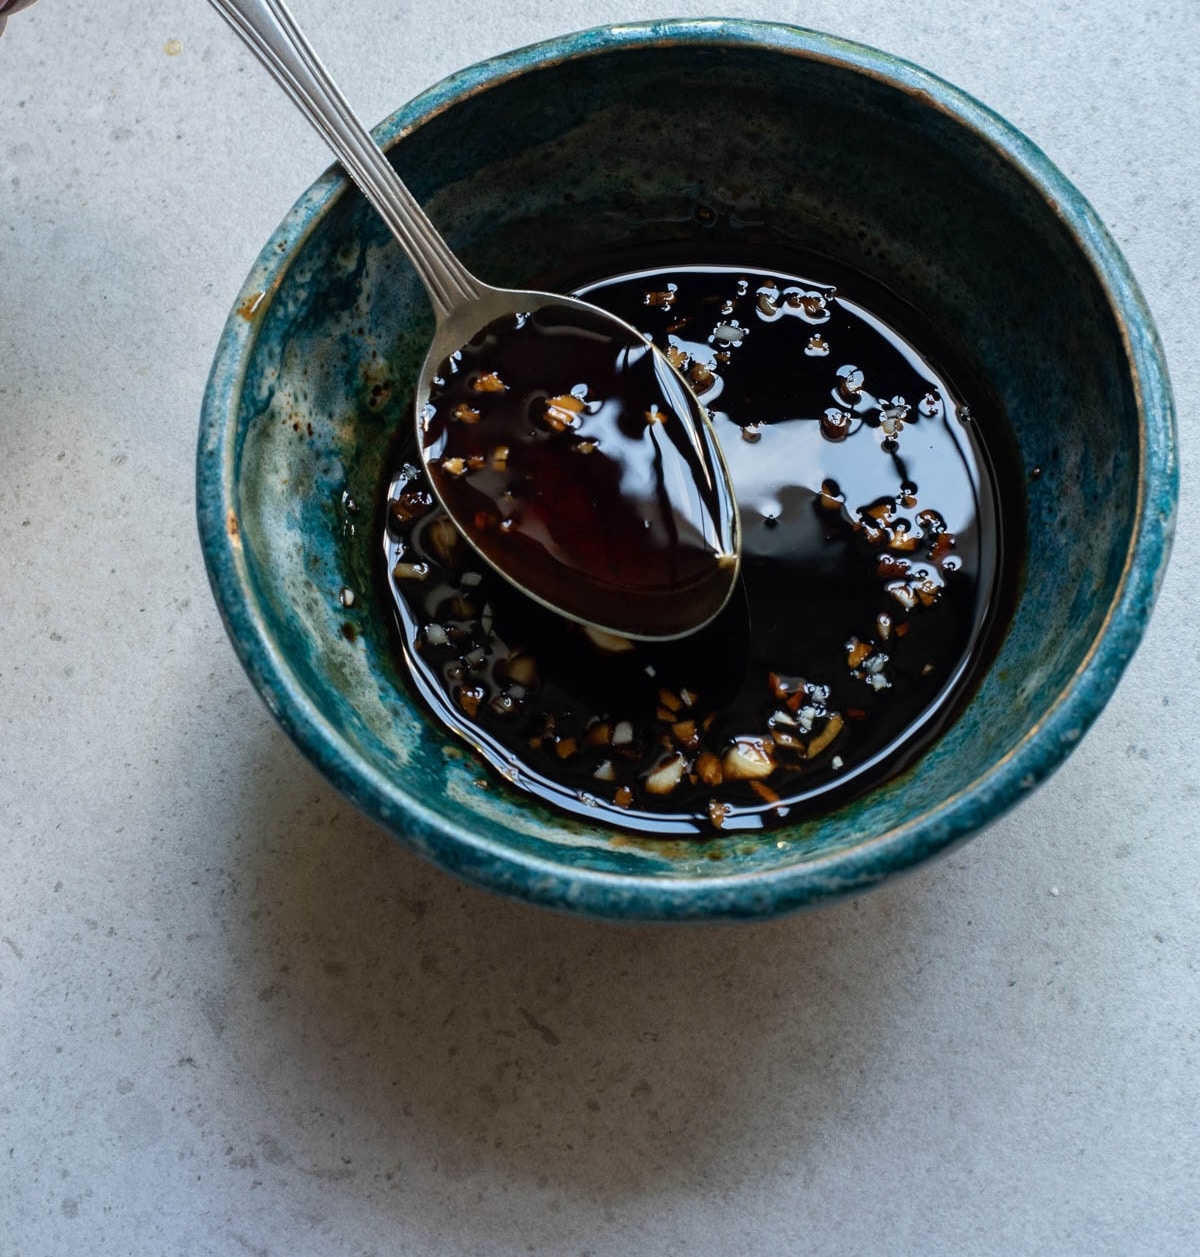 Soy based sauce in blue bowl.